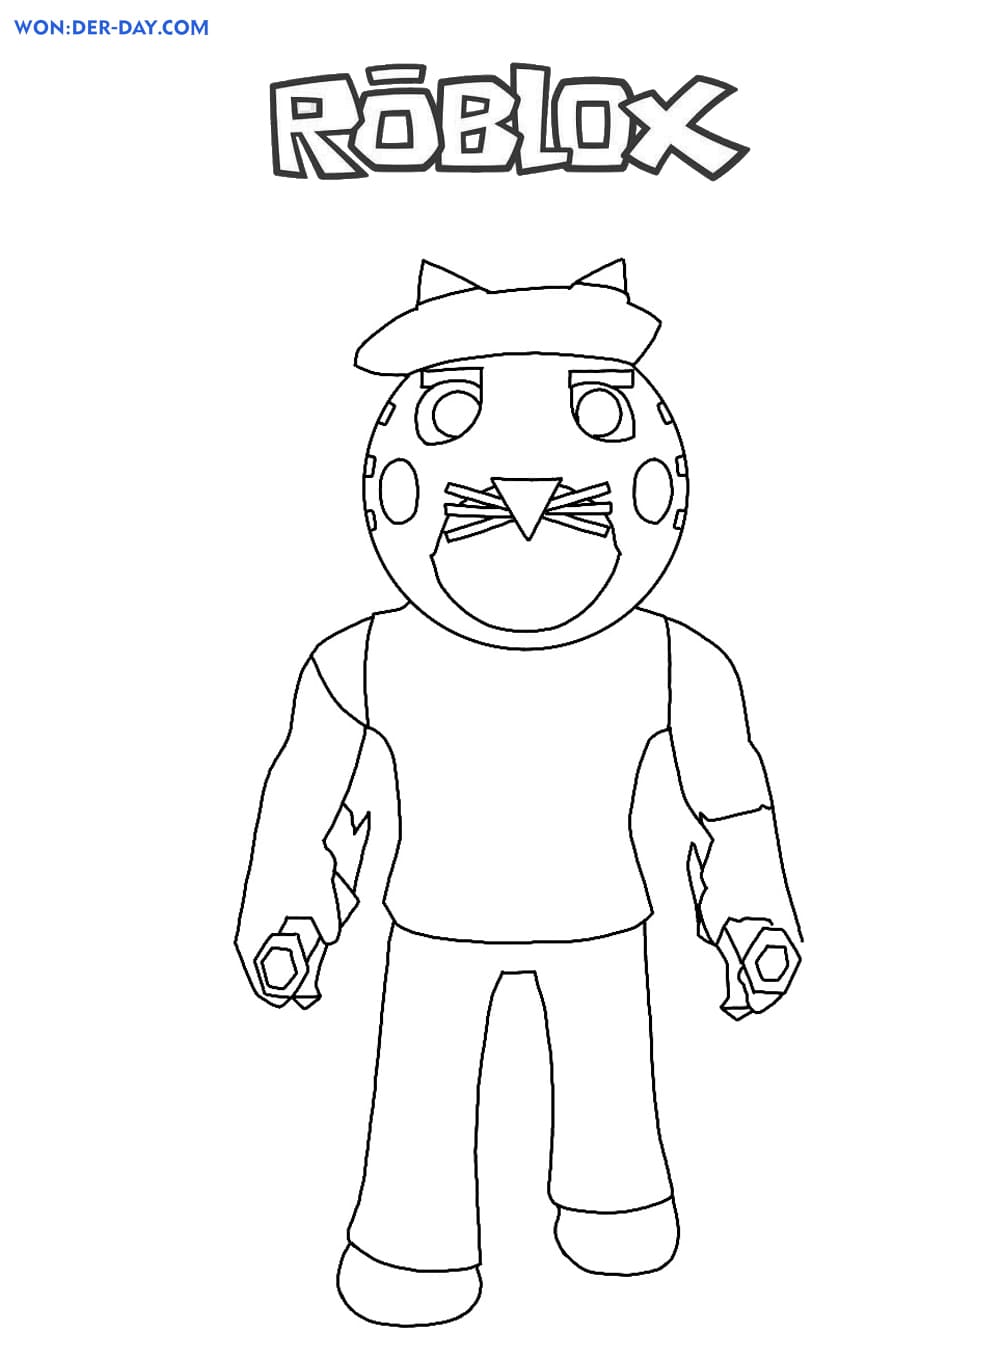 Download Piggy Roblox coloring pages | WONDER DAY — Coloring pages ...